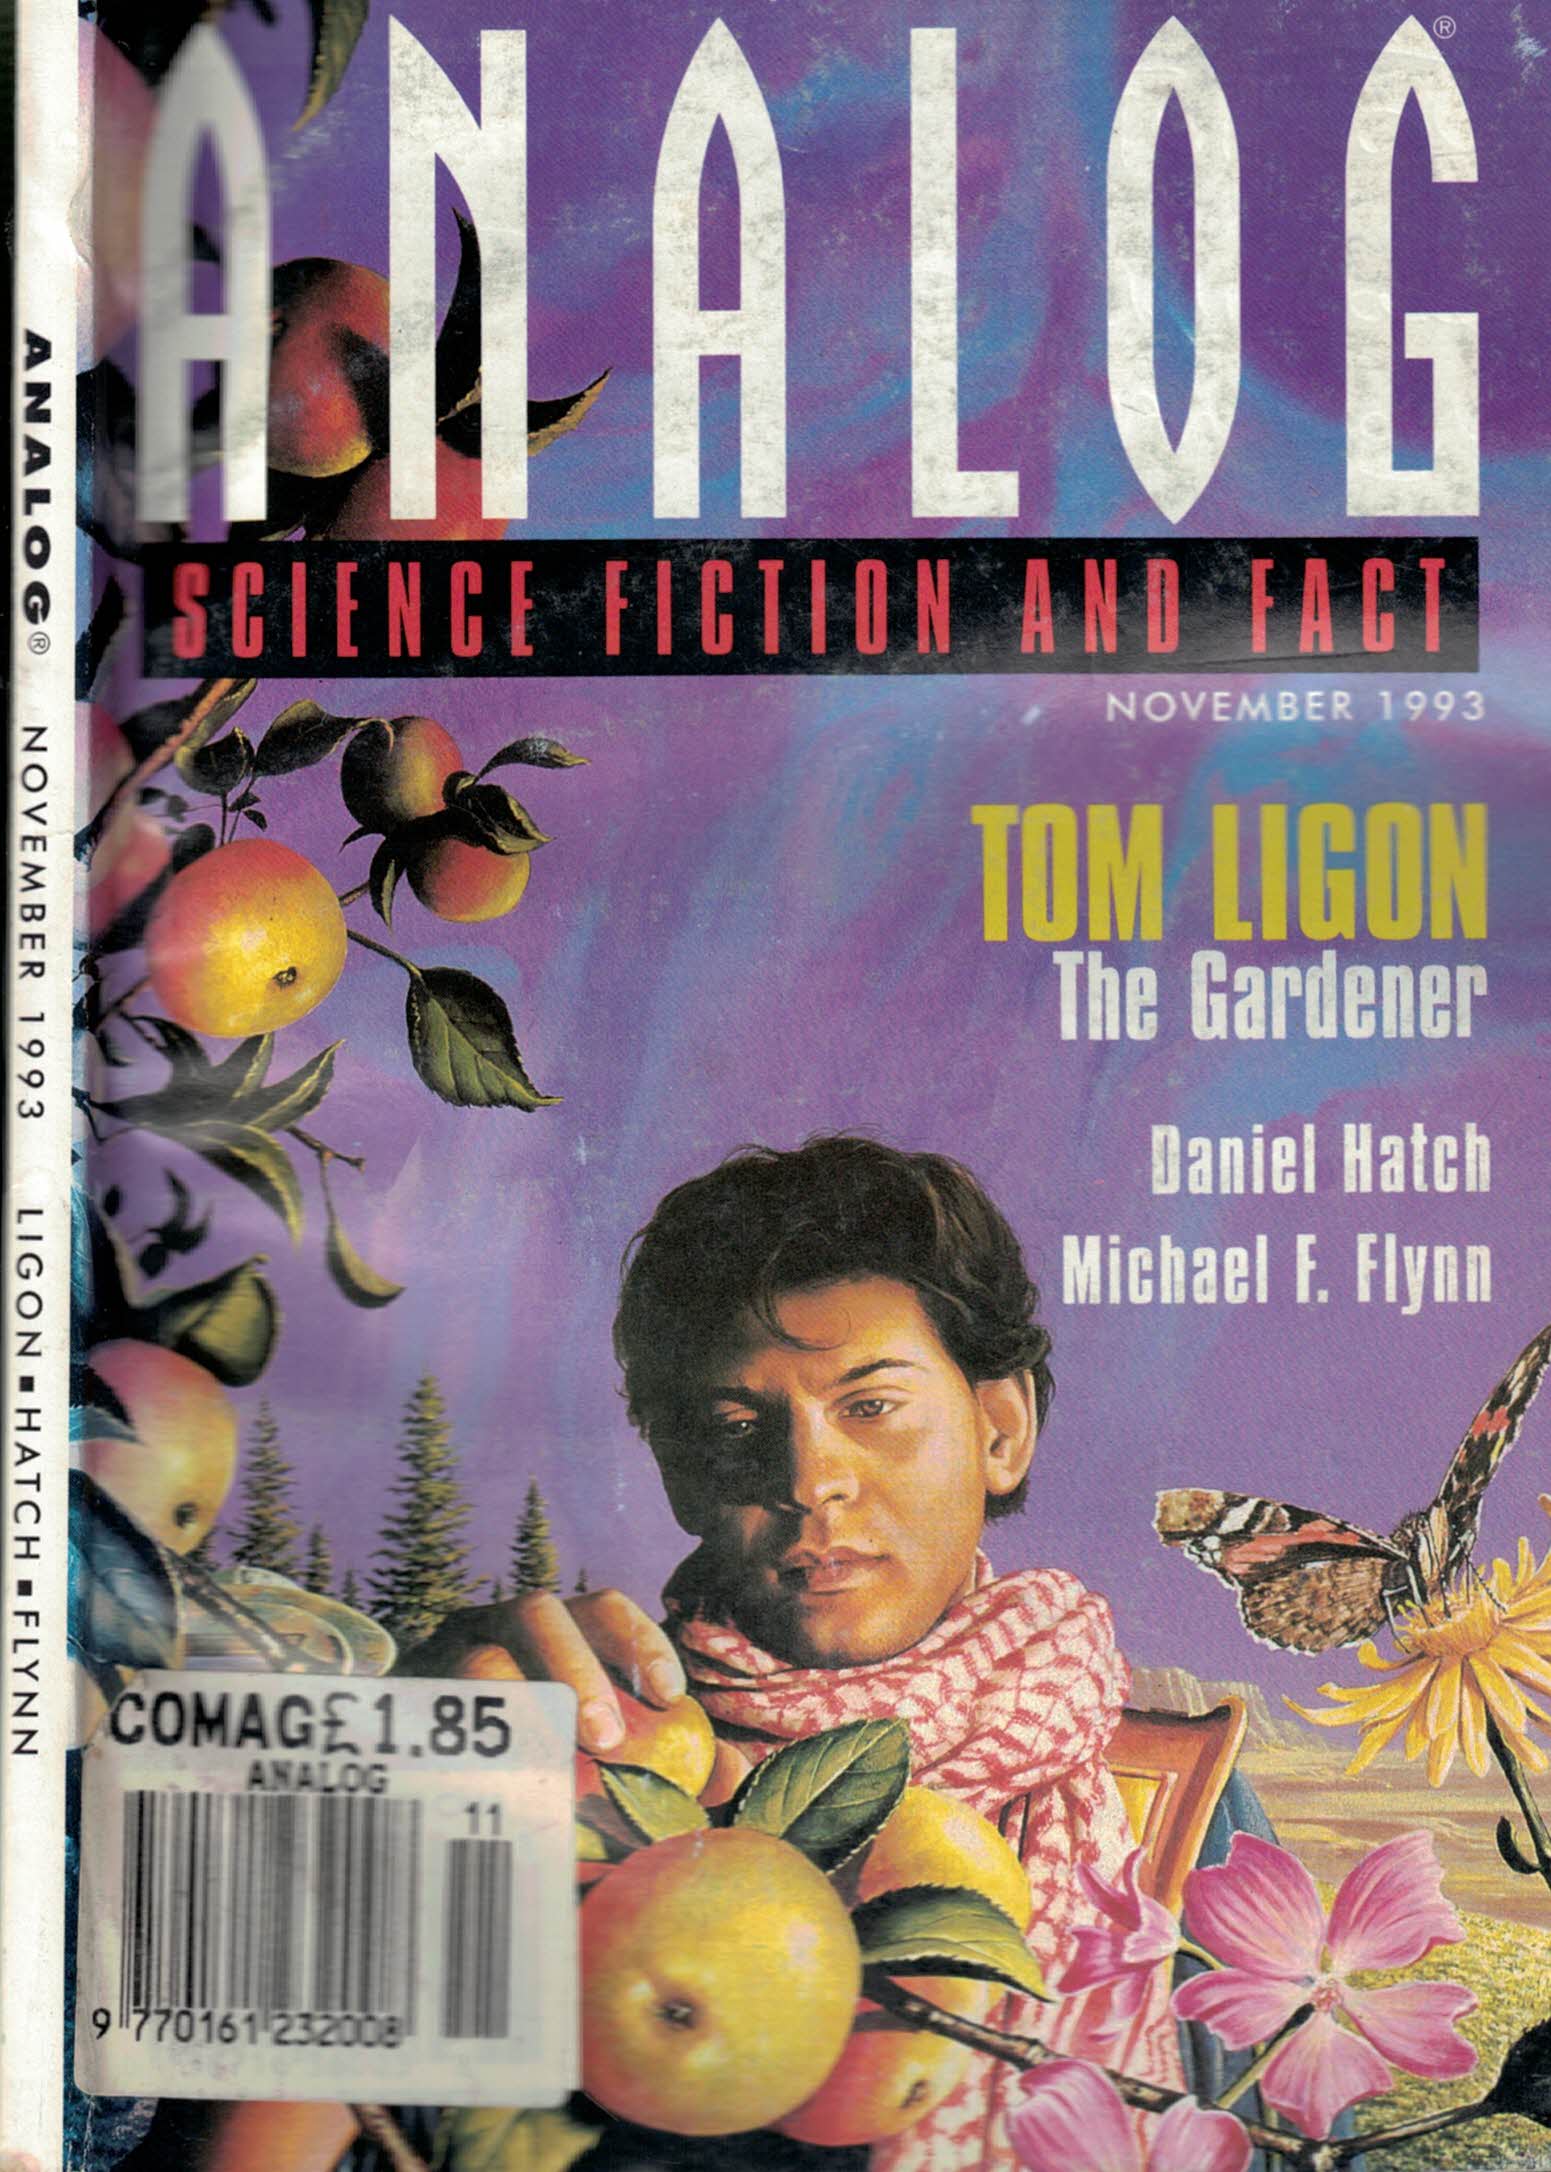 Analog. Science Fiction and Fact. Volume 113, Number 13. November 1993.